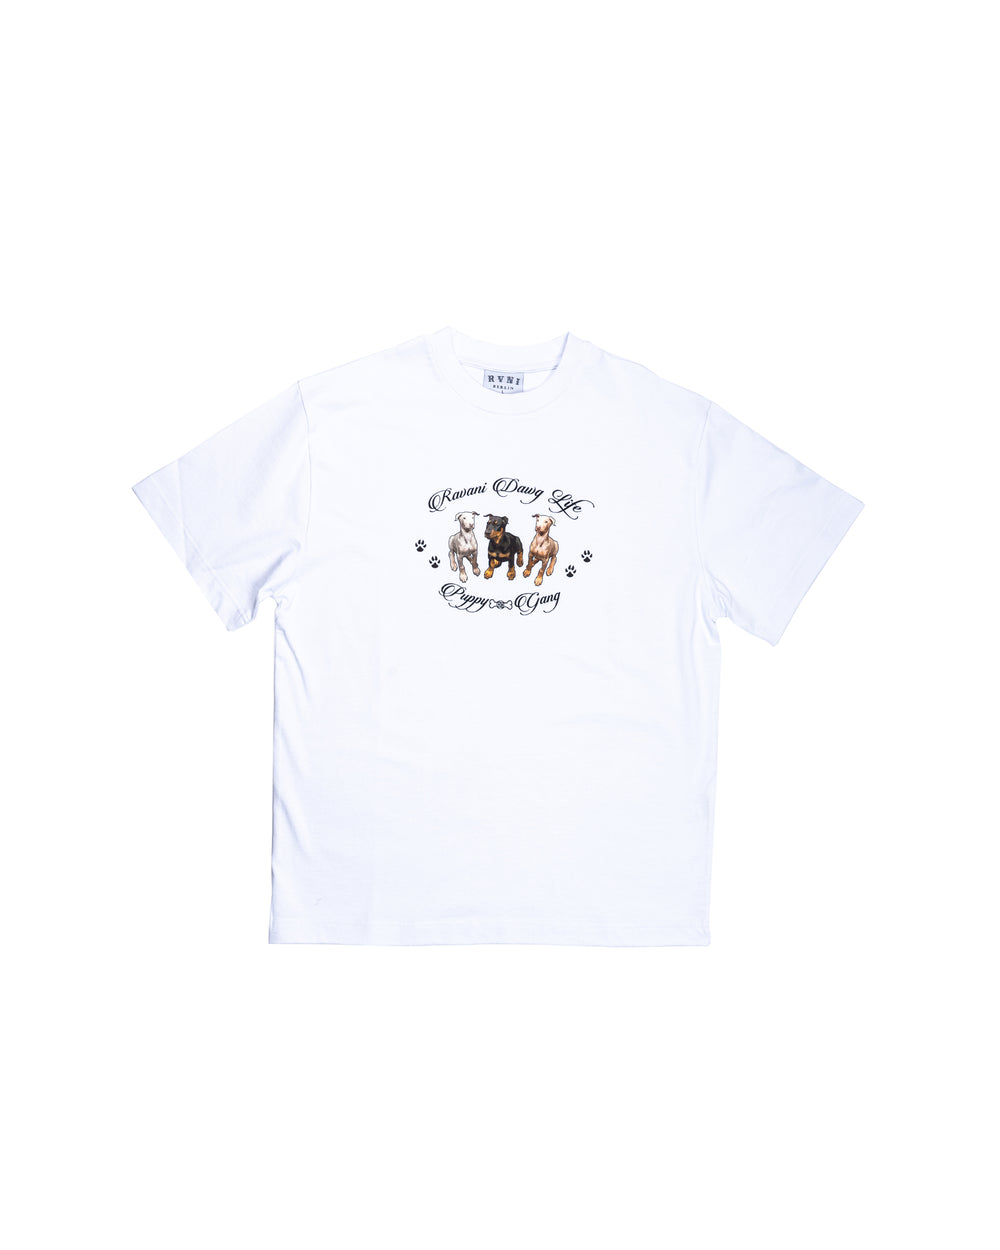 Dawg Life Puppy Gang Tee White